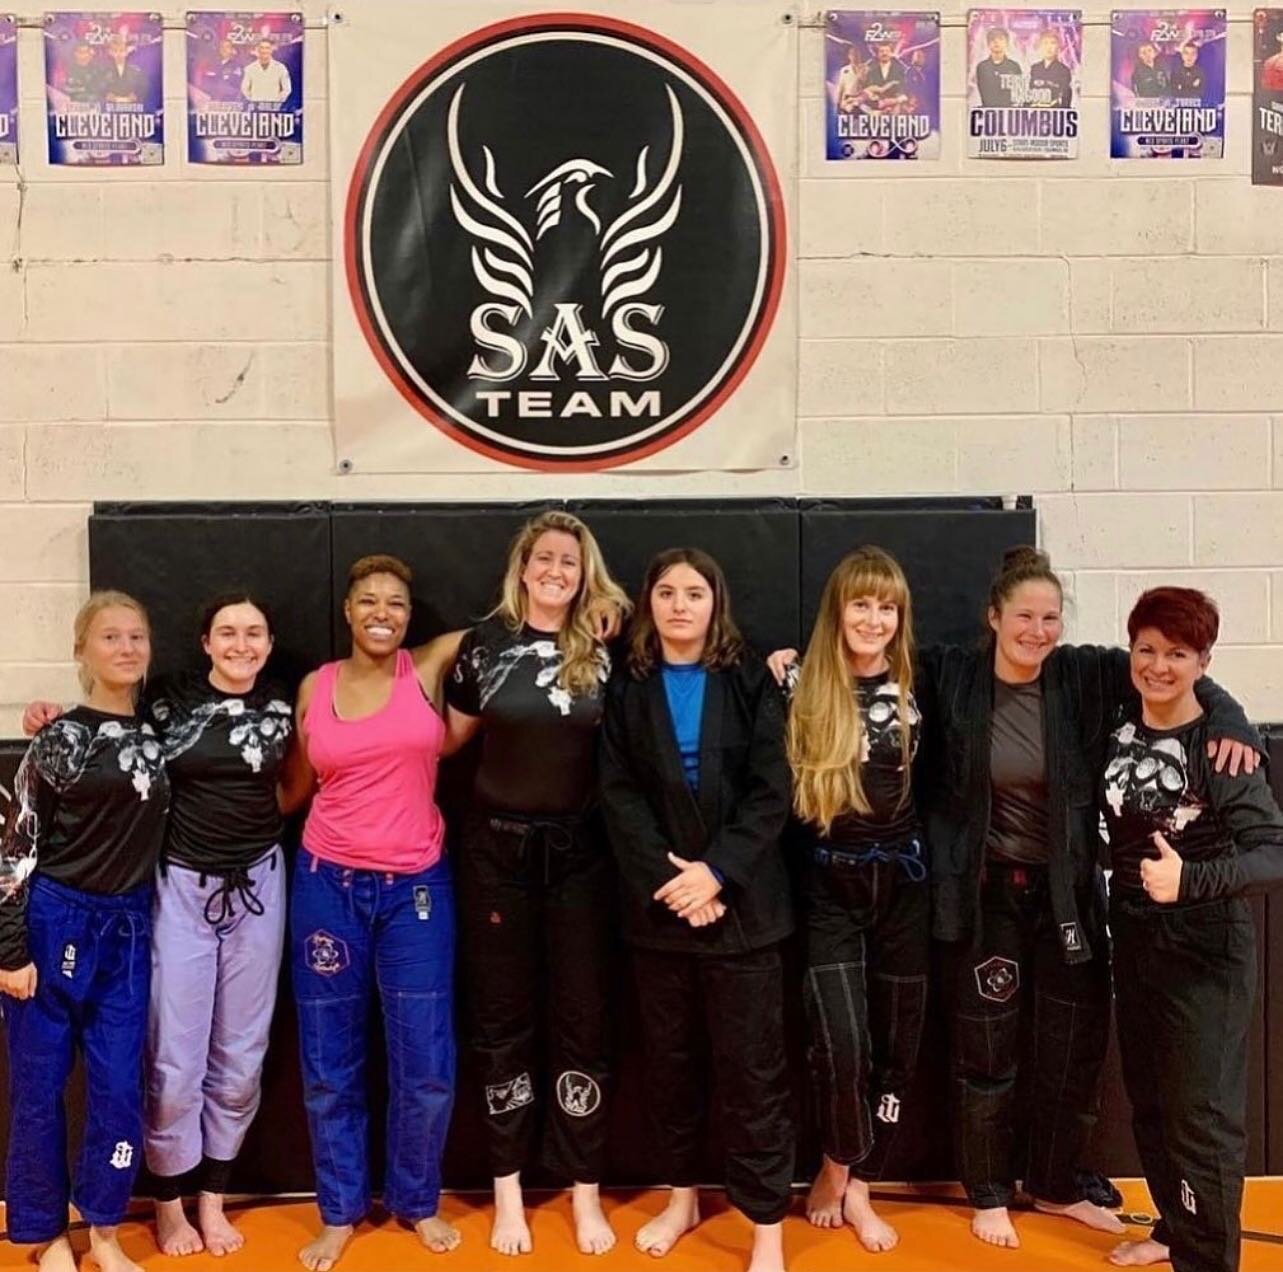 Friday:
Female Jiu Jitsu Class with Coach Autumn Gordon 6pm 
Come up and join us. 
Self Defense.&nbsp;&nbsp;
Grappling.&nbsp;&nbsp;
Competition.&nbsp;&nbsp;
Better your Health by increasing your self esteem, gain improved focus and discipline. 
Whate